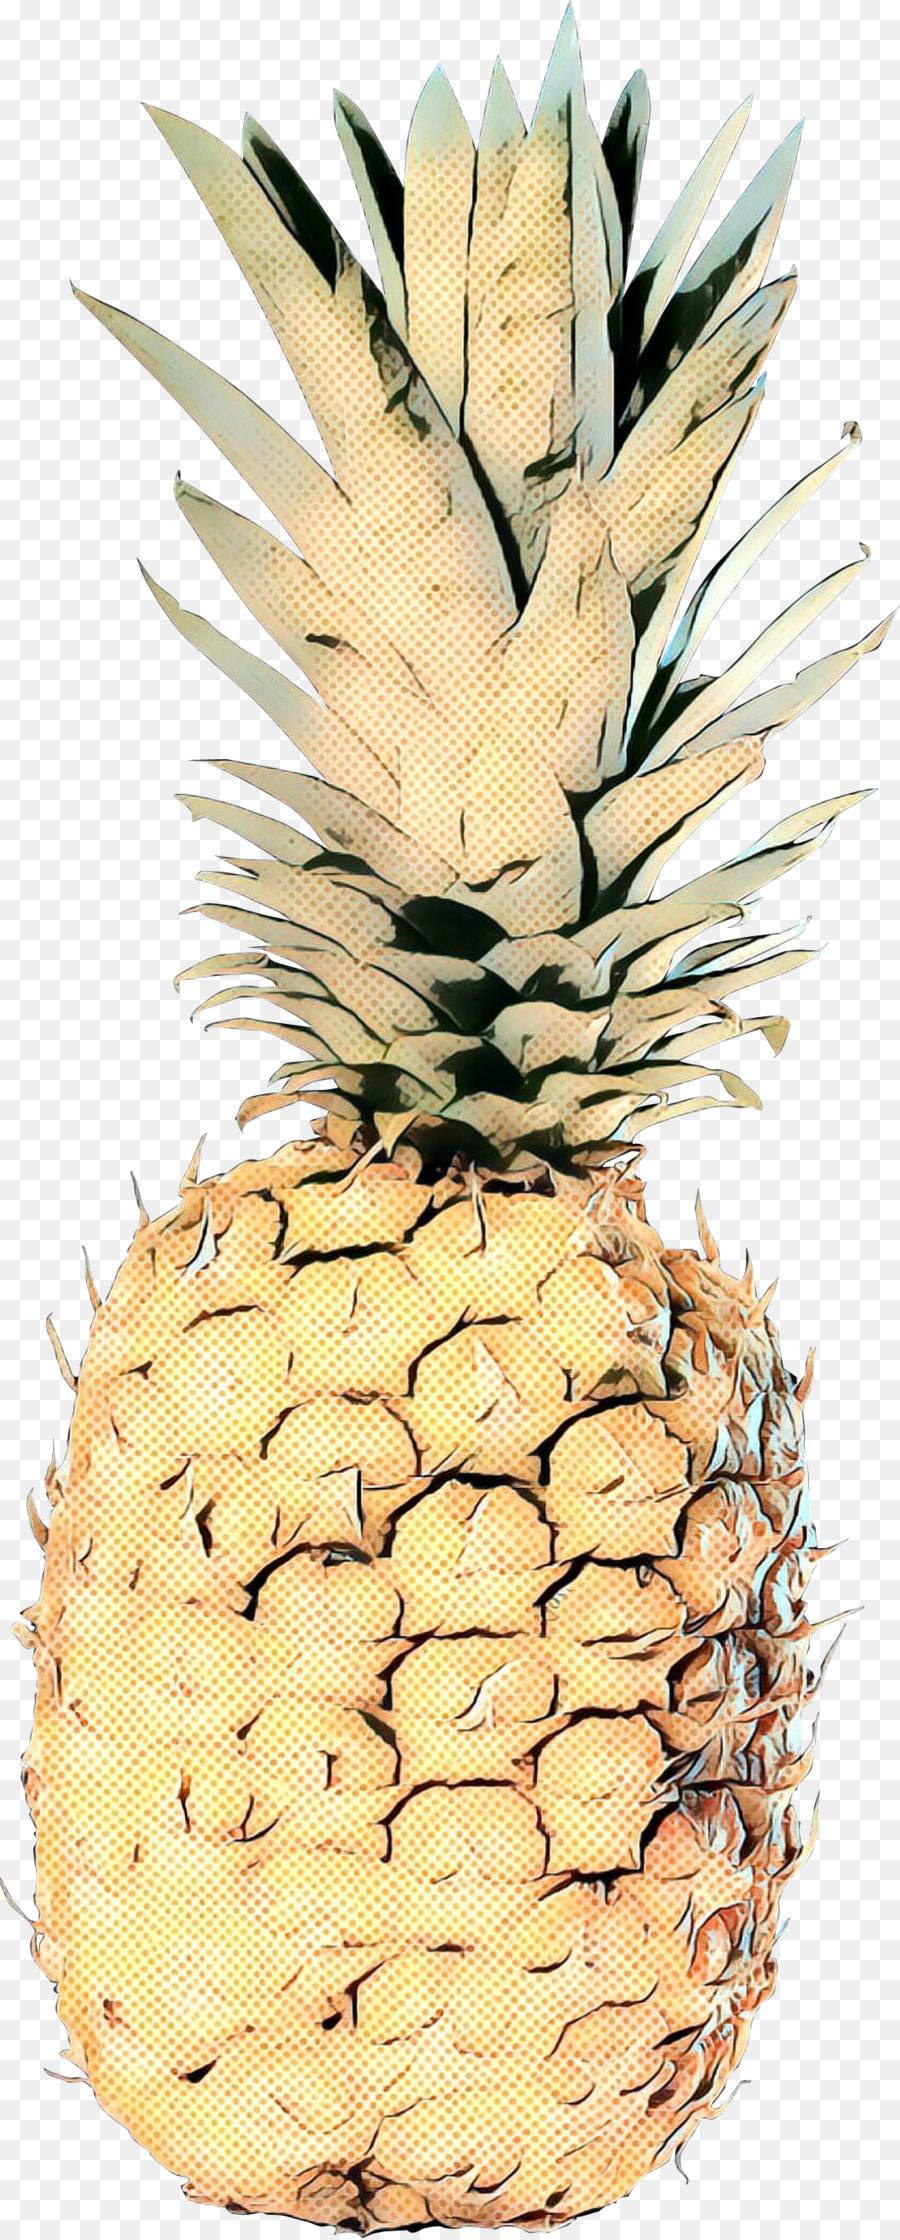 Abacaxi，Ananas PNG